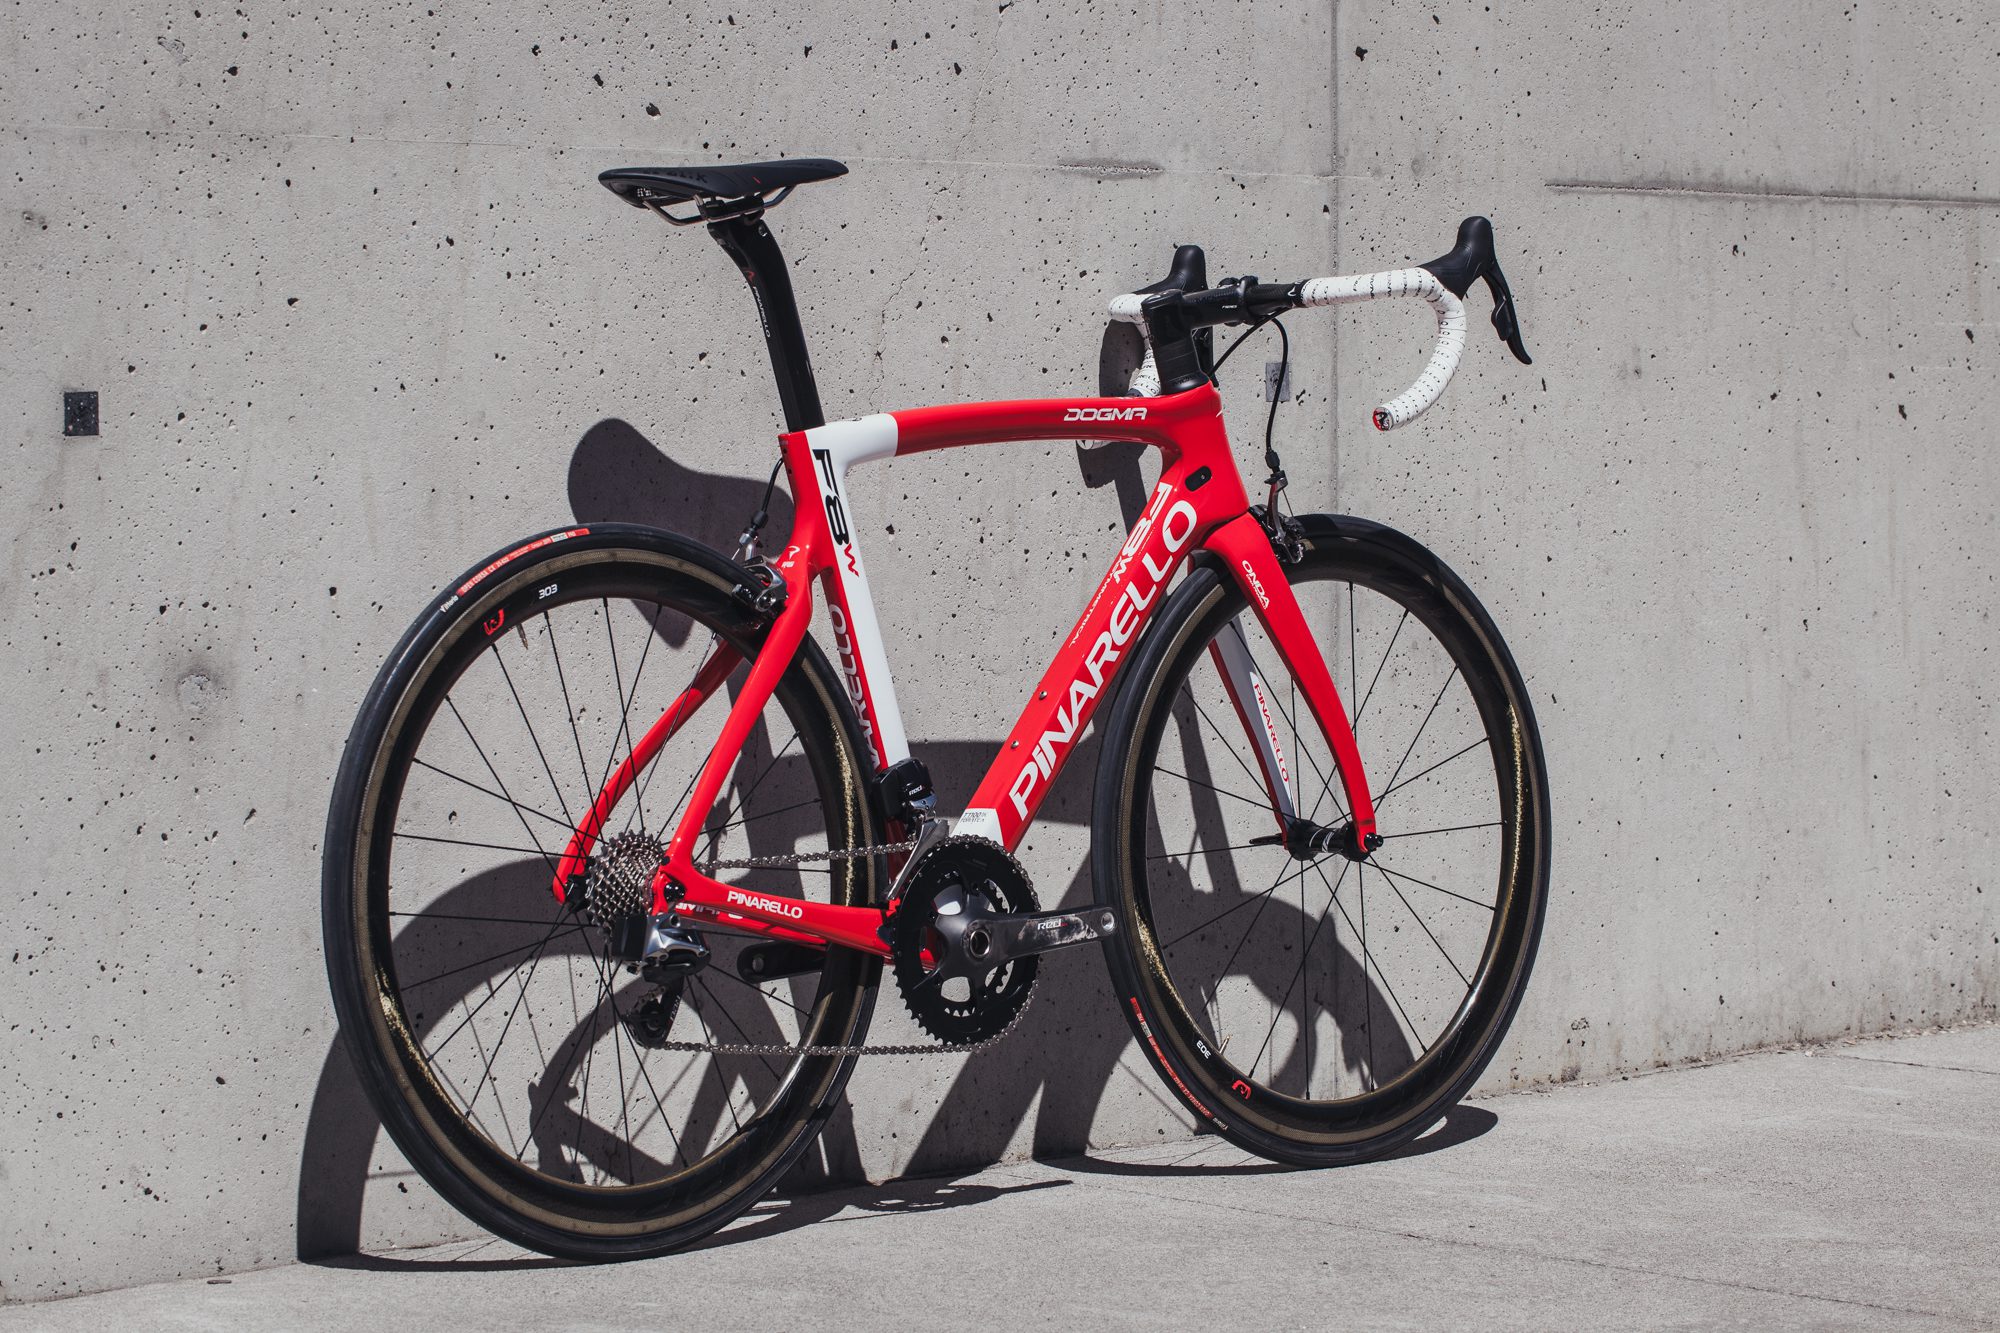 Louis Vuitton is selling a $35,000 bike - Canadian Cycling Magazine